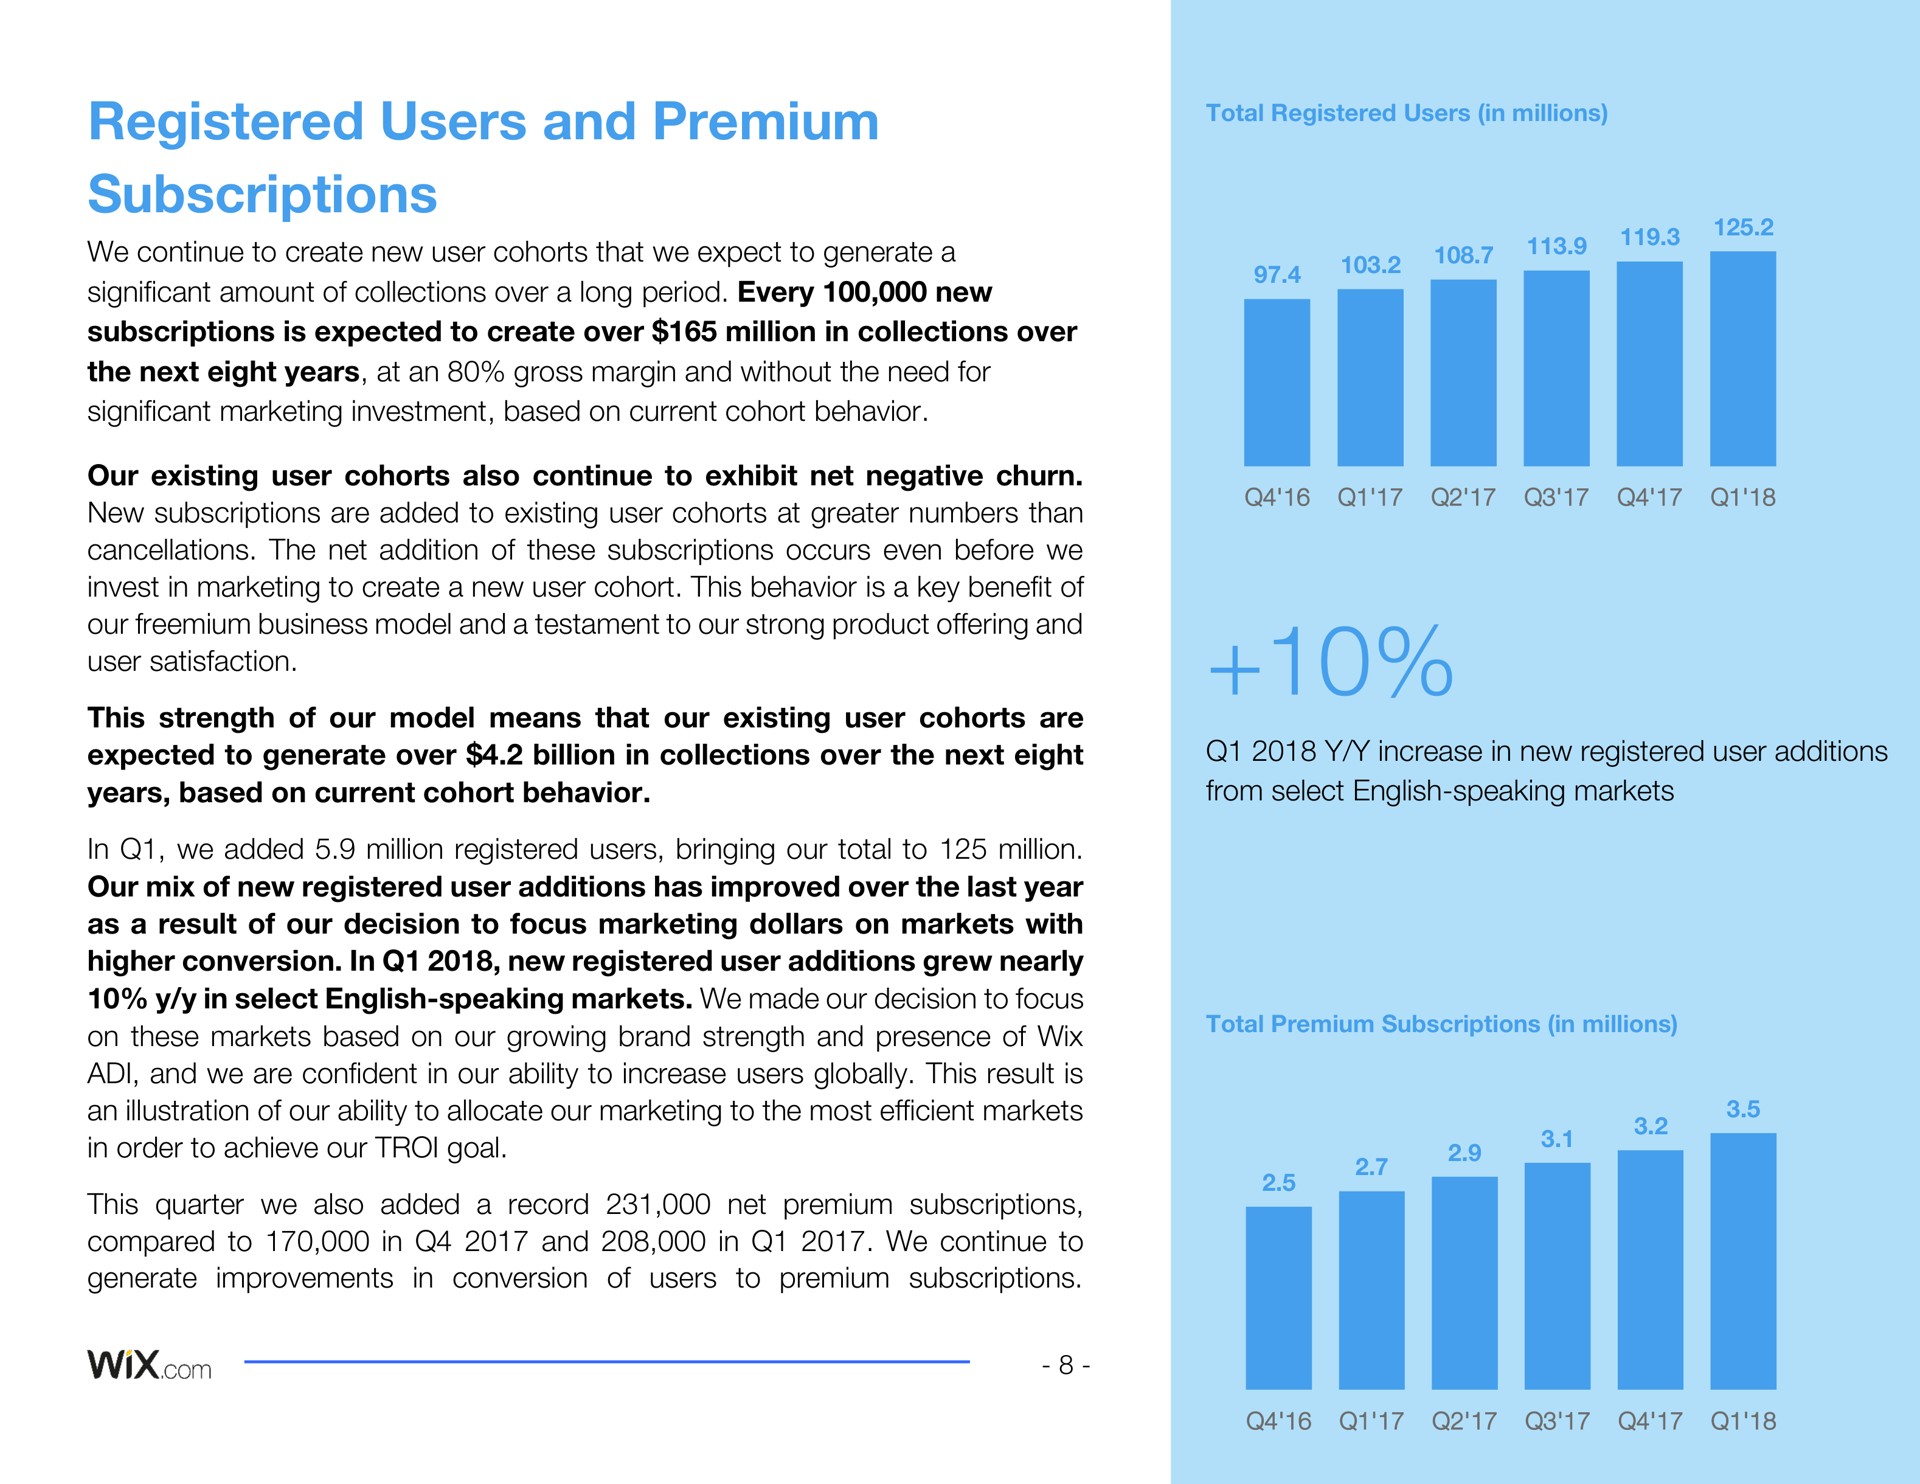 registered users and premium subscriptions we continue to create new user cohorts that we expect to generate a significant amount of collections over a long period every new subscriptions is expected to create over million in collections over the next eight years at an gross margin and without the need for significant marketing investment based on current cohort behavior our existing user cohorts also continue to exhibit net negative churn new subscriptions are added to existing user cohorts at greater numbers than cancellations the net addition of these subscriptions occurs even before we invest in marketing to create a new user cohort this behavior is a key benefit of our business model and a testament to our strong product offering and user satisfaction this strength of our model means that our existing user cohorts are expected to generate over billion in collections over the next eight years based on current cohort behavior in we added million registered users bringing our total to million our mix of new registered user additions has improved over the last year as a result of our decision to focus marketing dollars on markets with higher conversion in new registered user additions grew nearly in select speaking markets we made our decision to focus on these markets based on our growing brand strength and presence of and we are confident in our ability to increase users globally this result is an illustration of our ability to allocate our marketing to the most efficient markets in order to achieve our goal this quarter we also added a record net premium subscriptions compared to in and in we continue to generate improvements in conversion of users to premium subscriptions increase in new registered user additions from select speaking markets | Wix